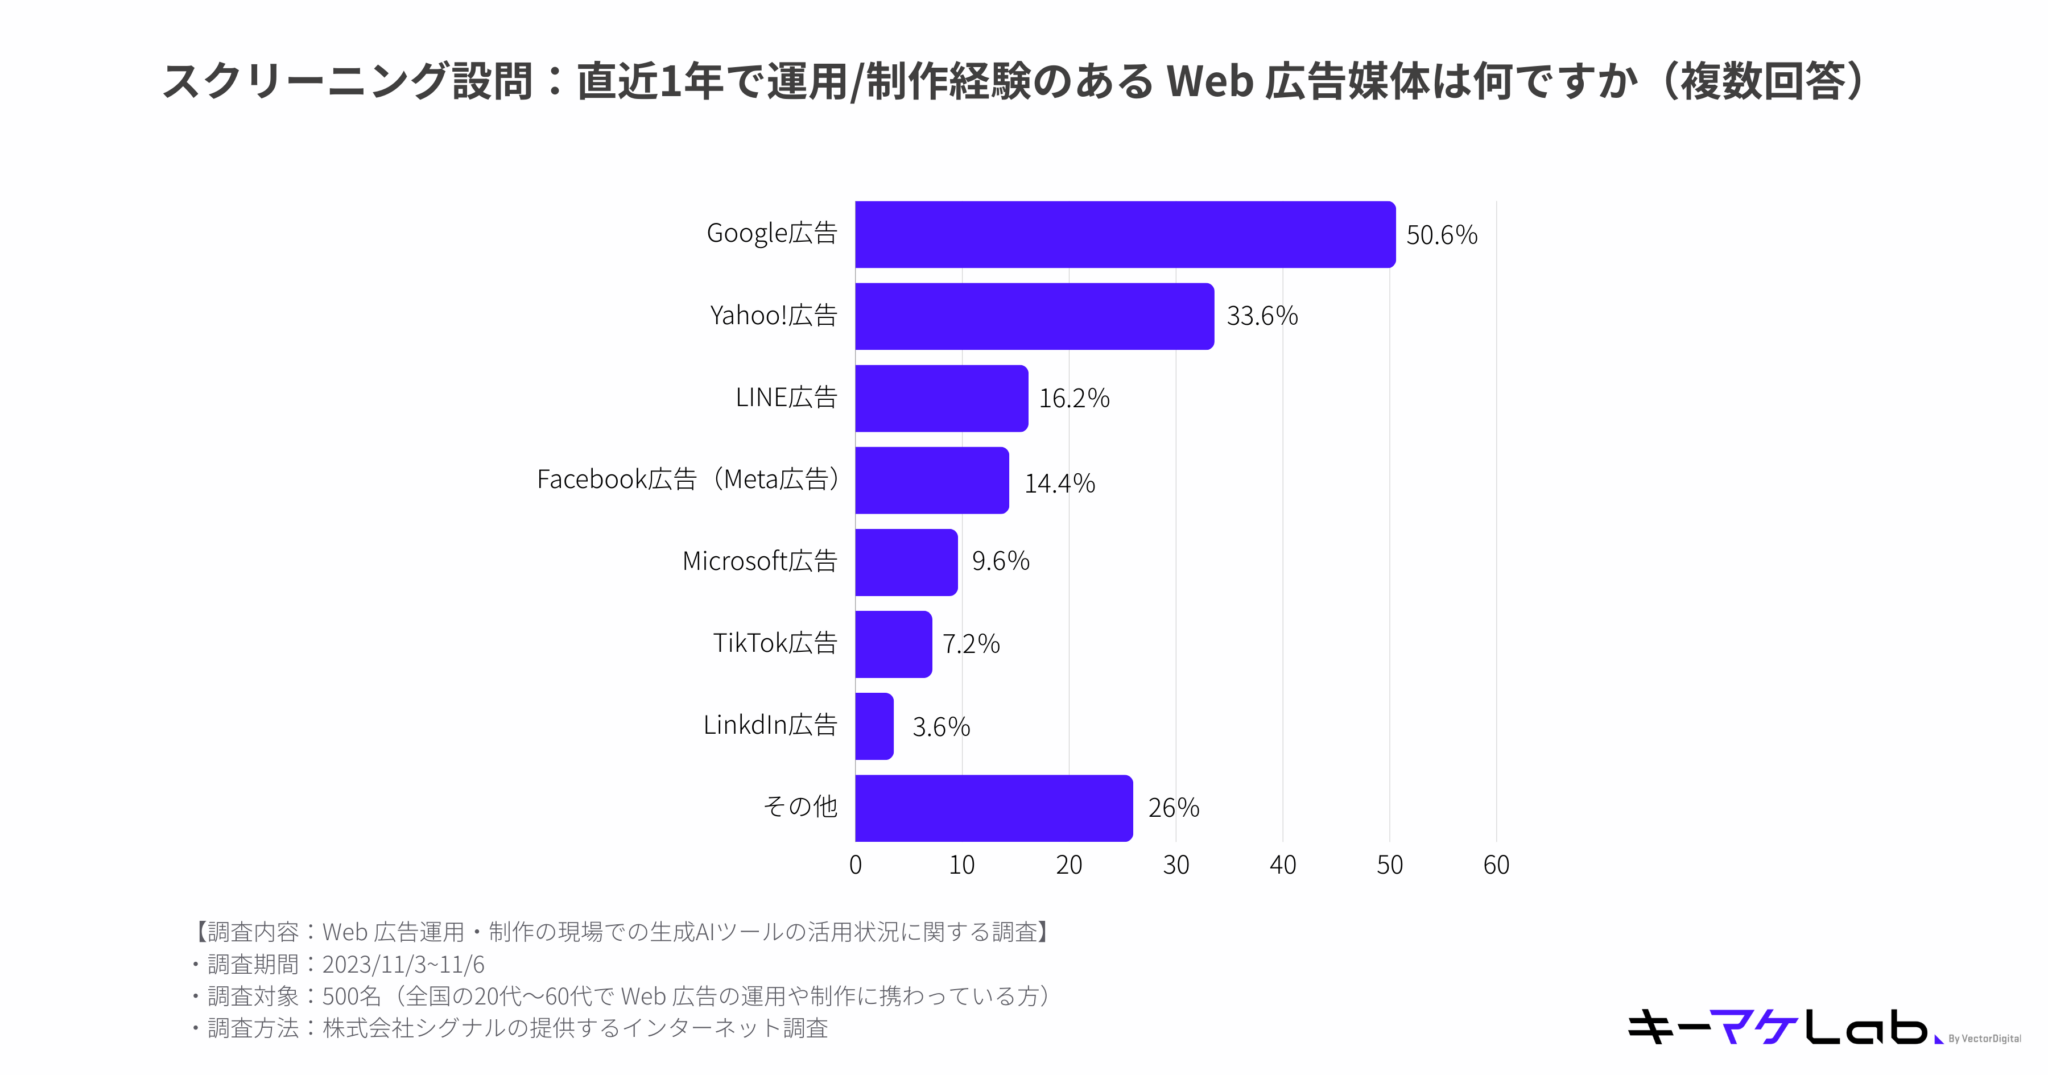 Web advertising media with experience in operationproduction in the past year